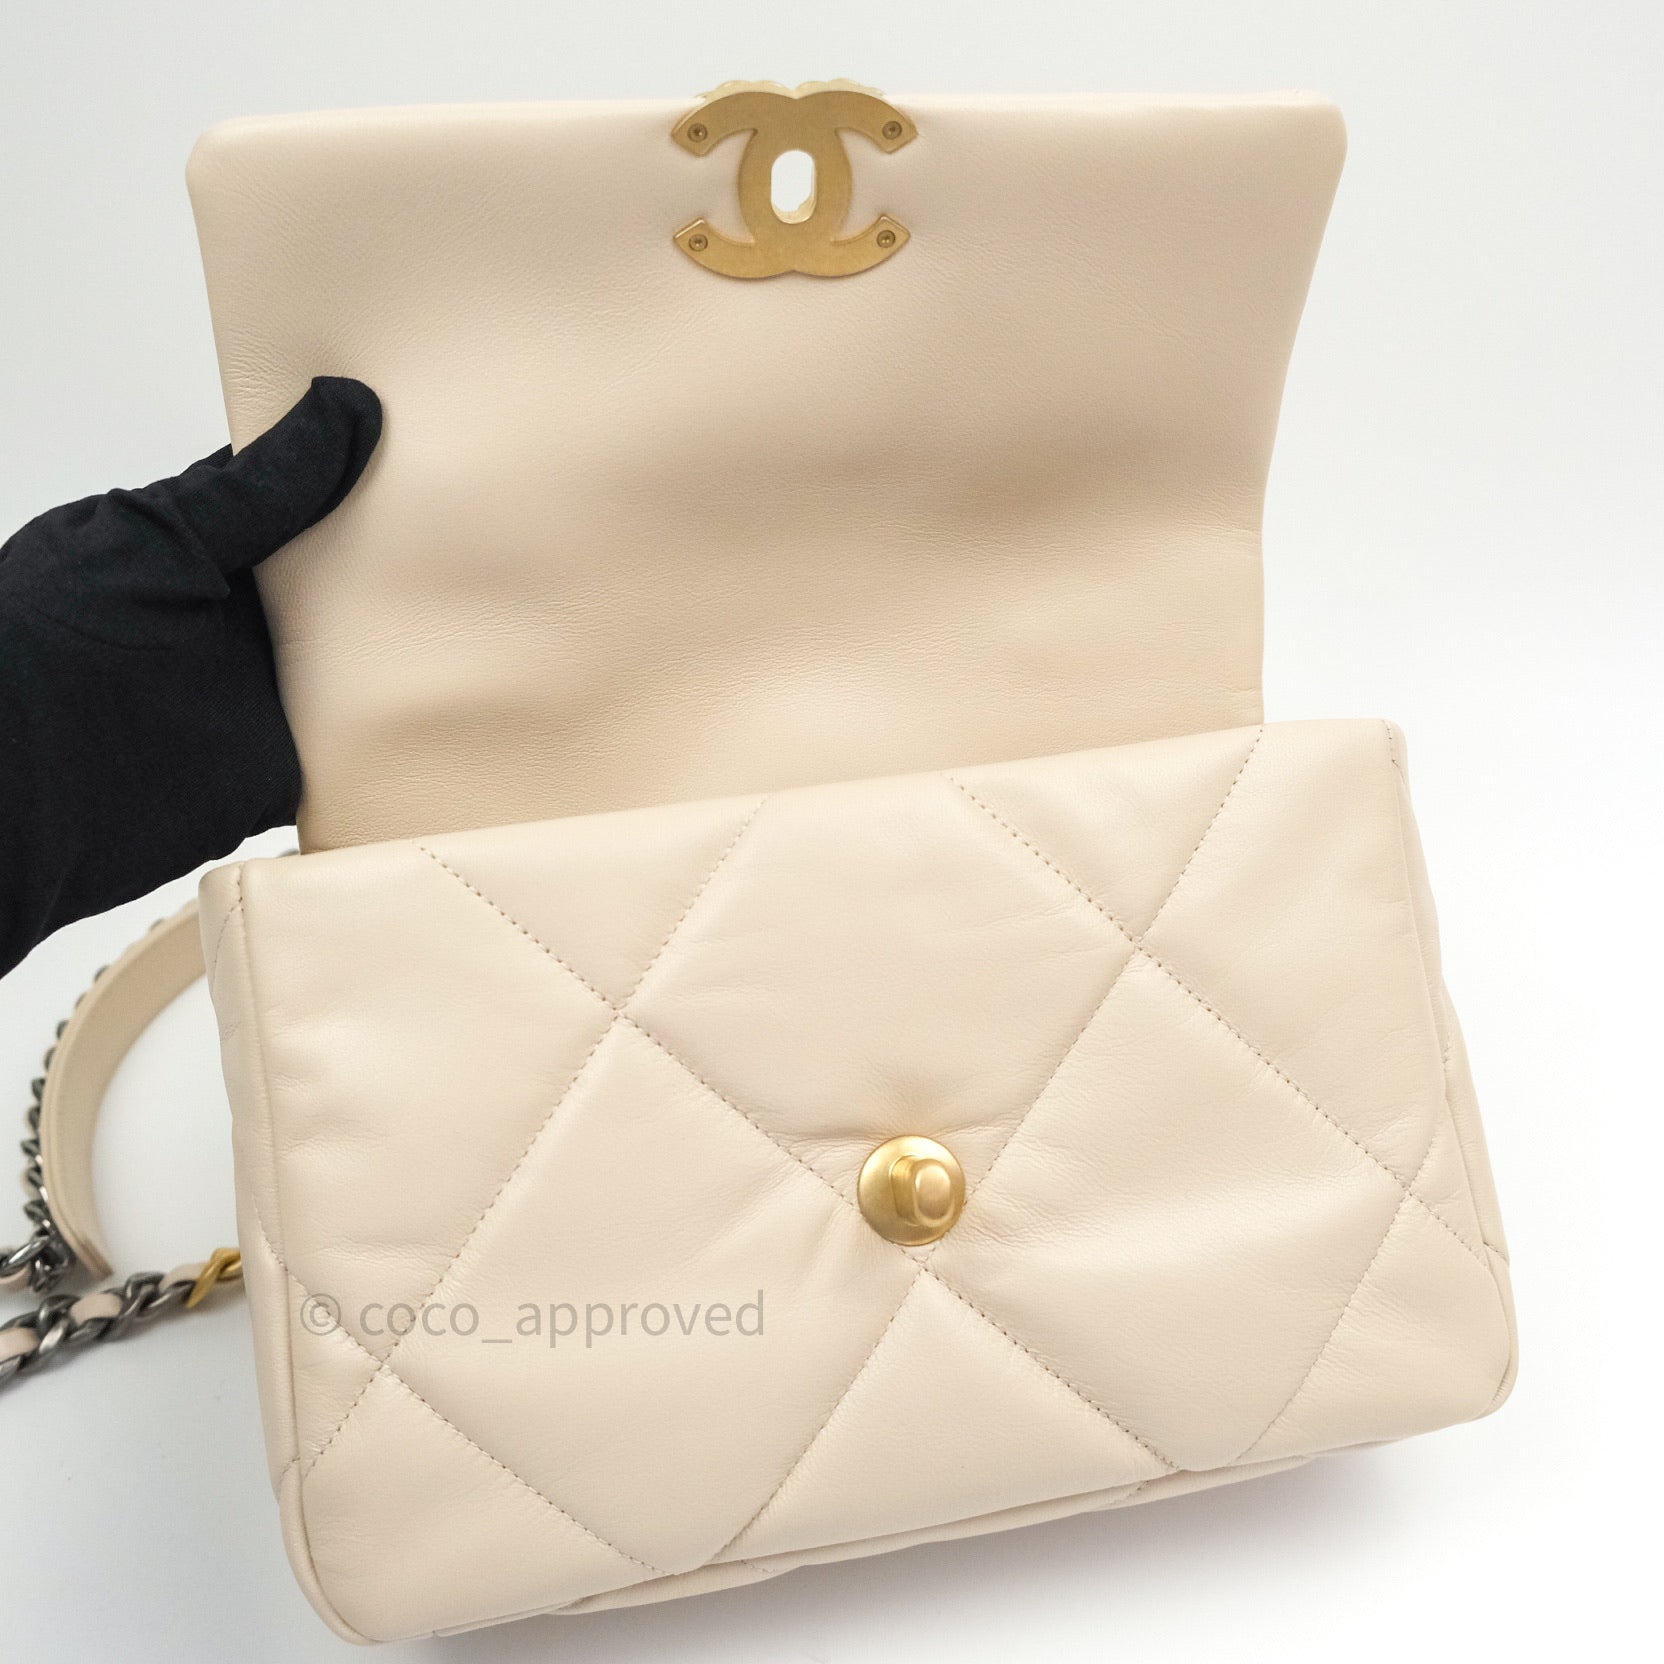 Chanel 19 Small Beige Goatskin Mixed Hardware 20A – Coco Approved Studio